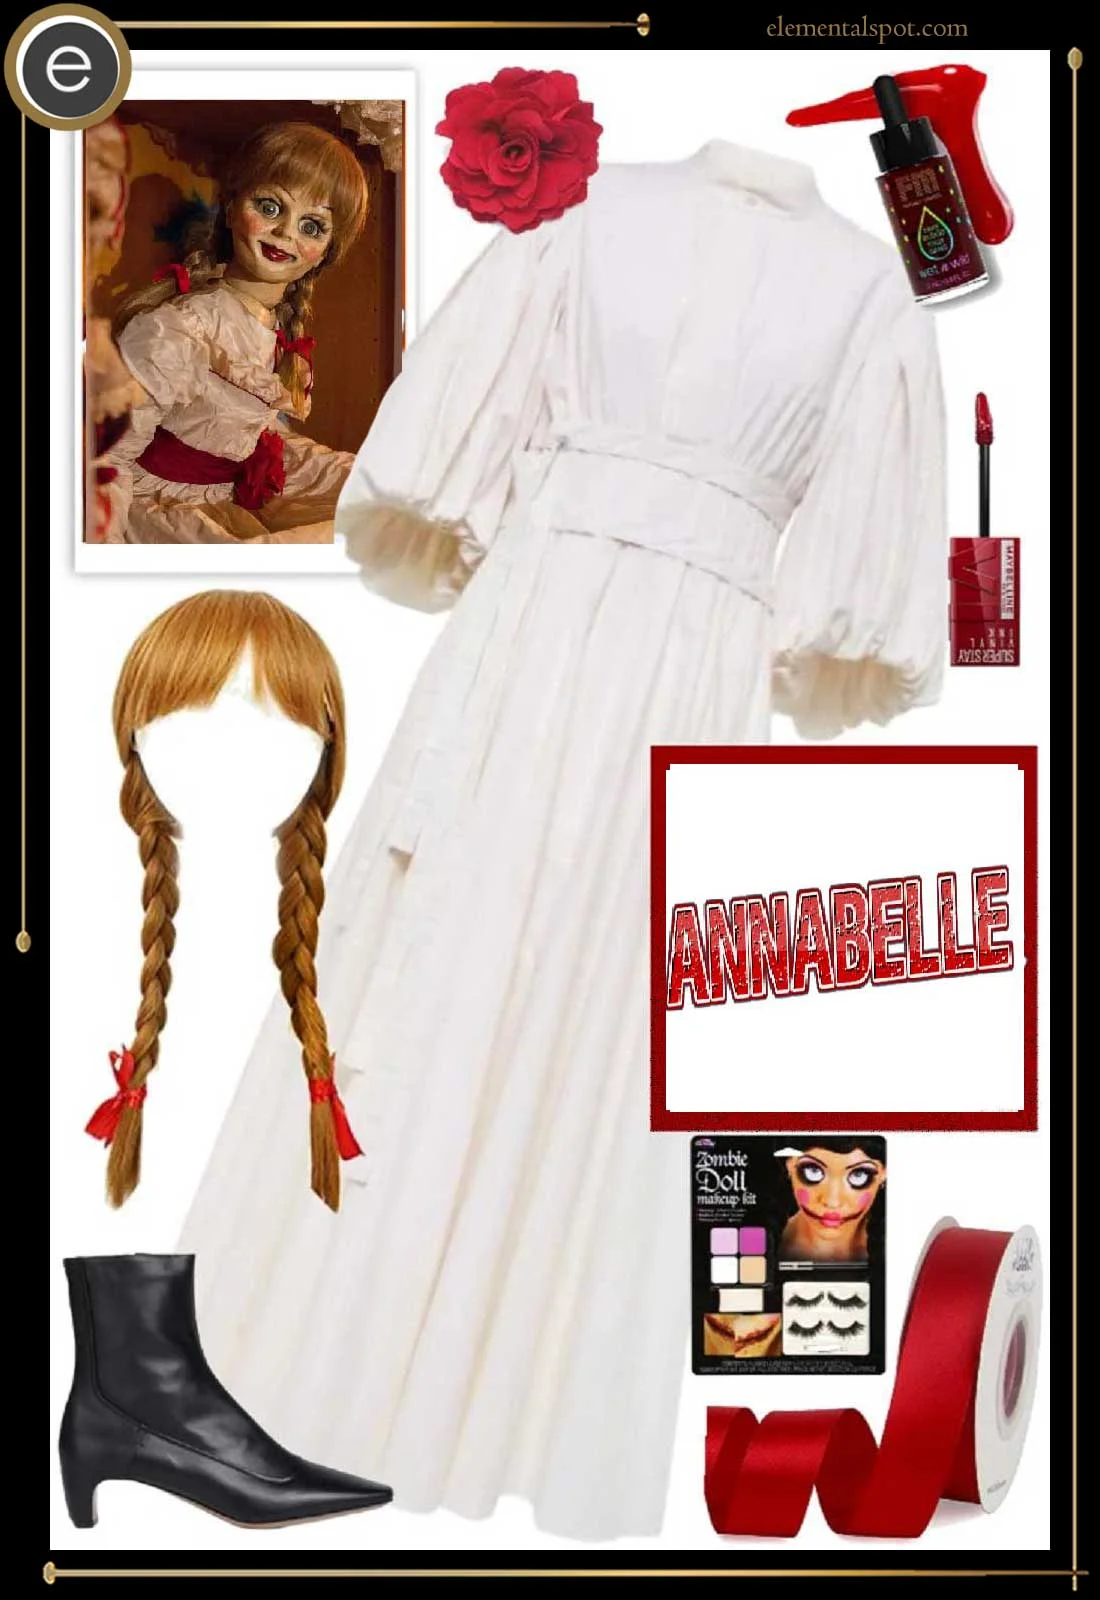 Dress Up Like Annabelle From The